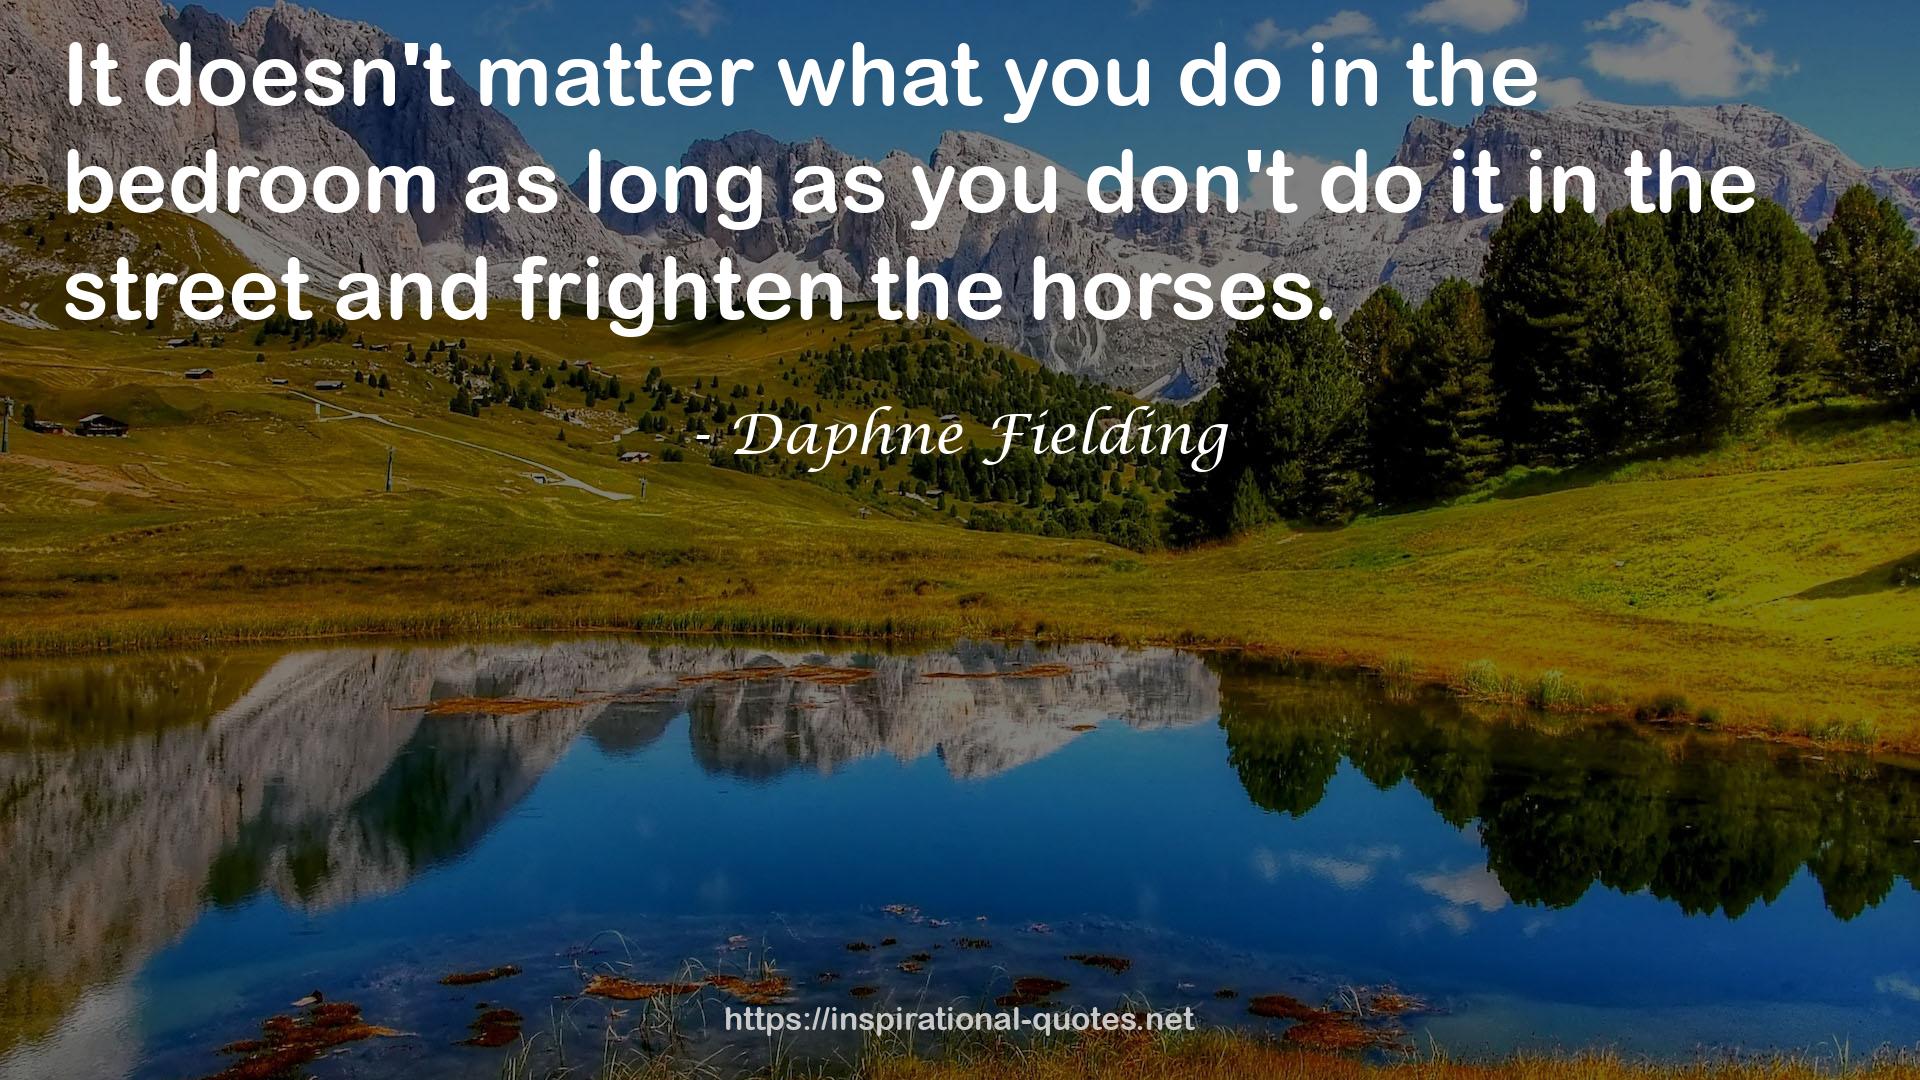 Daphne Fielding QUOTES